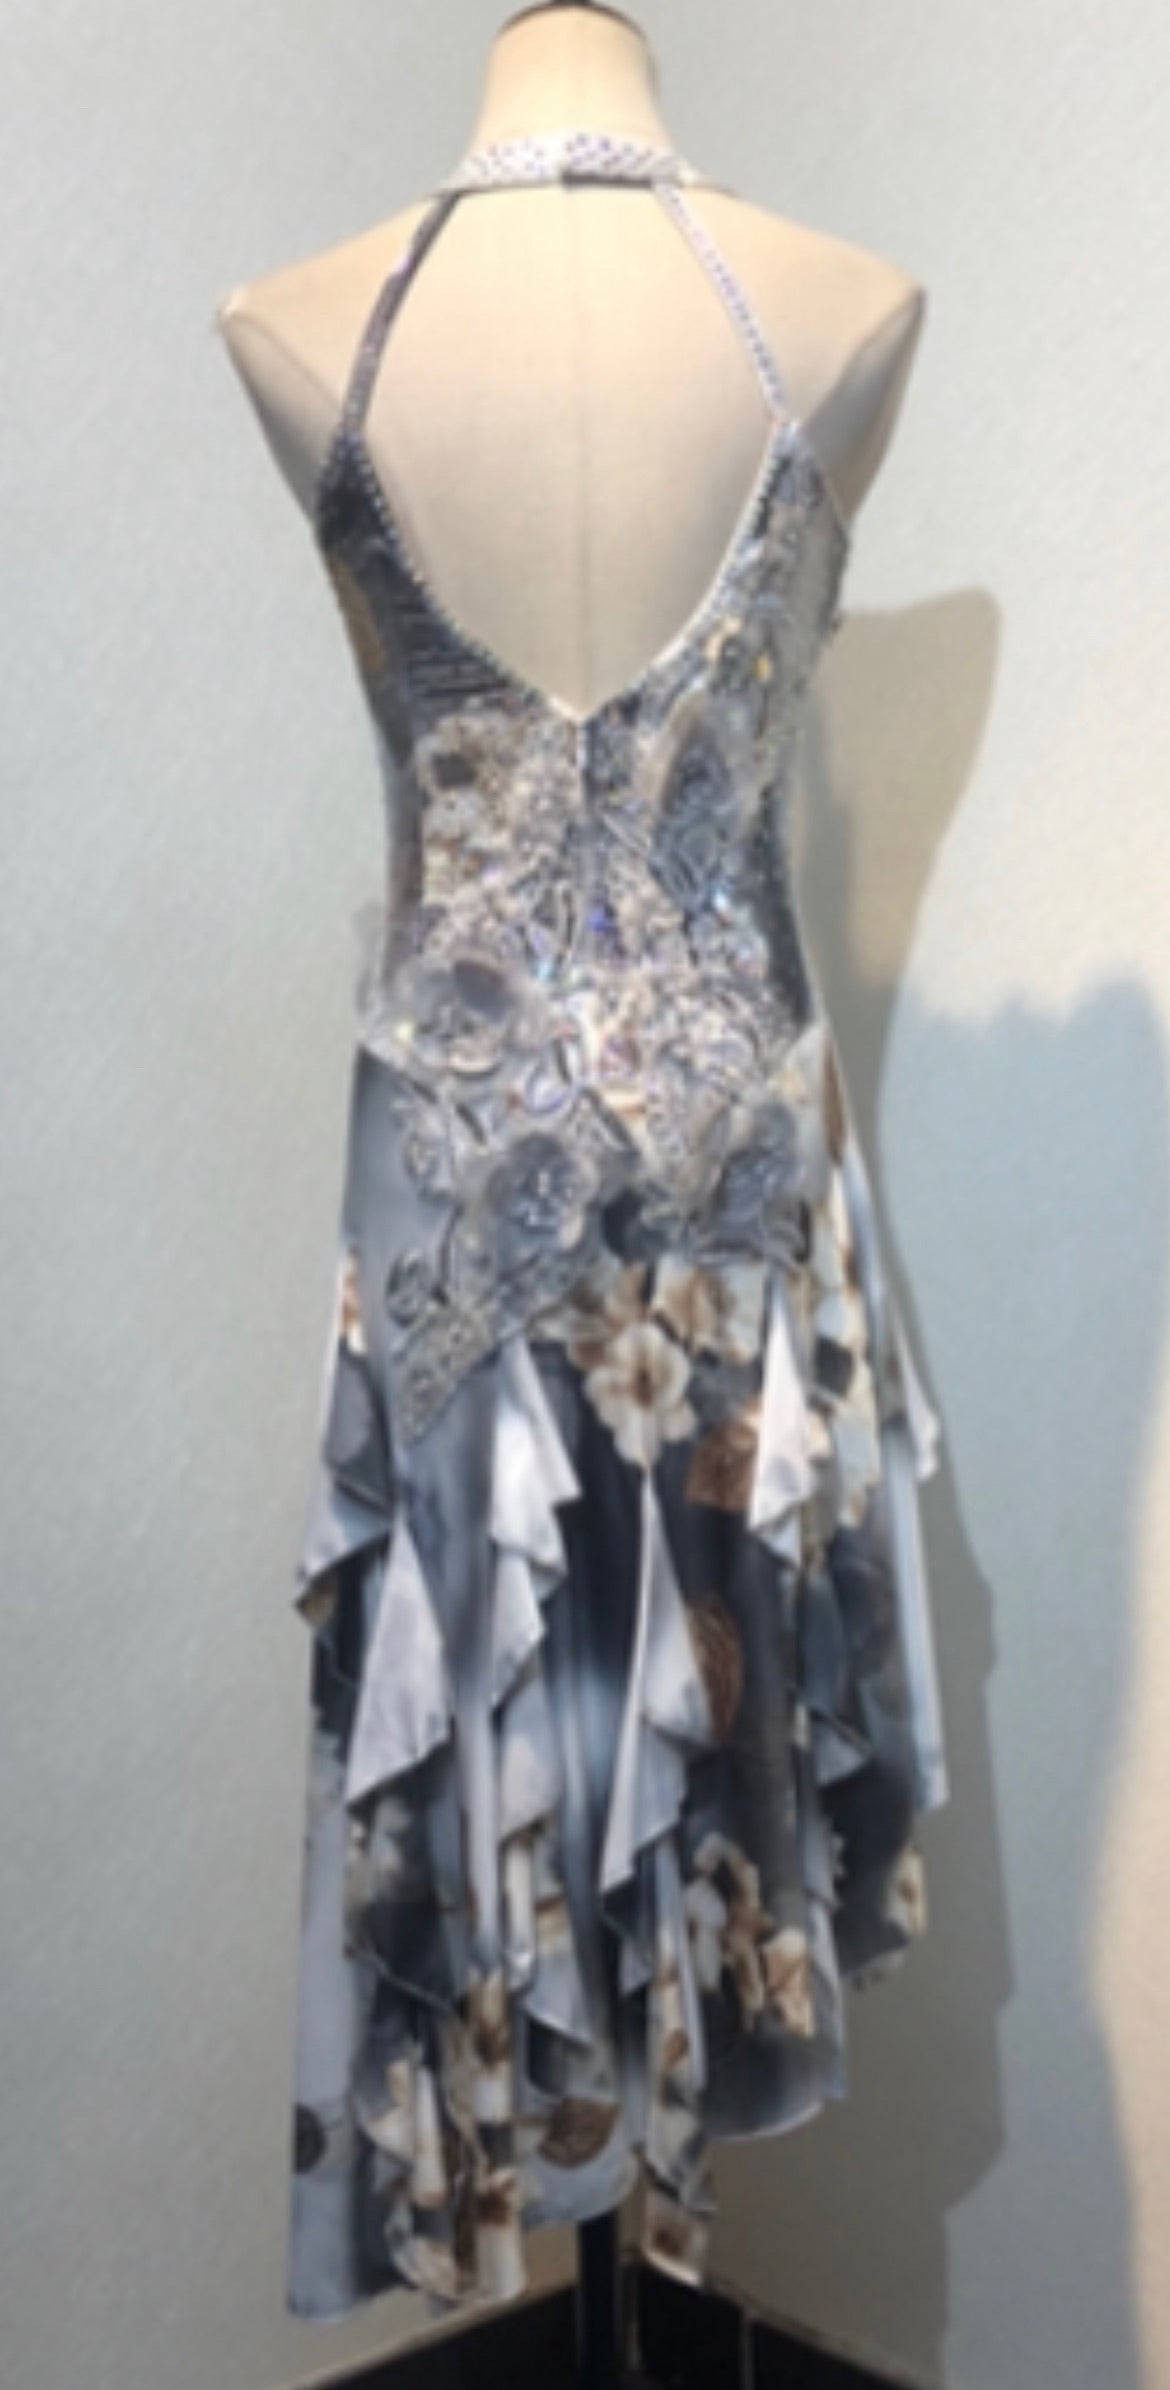 118 Silver, Grey & Gold Floral Latin Dress. Grey flowers decorated in AB